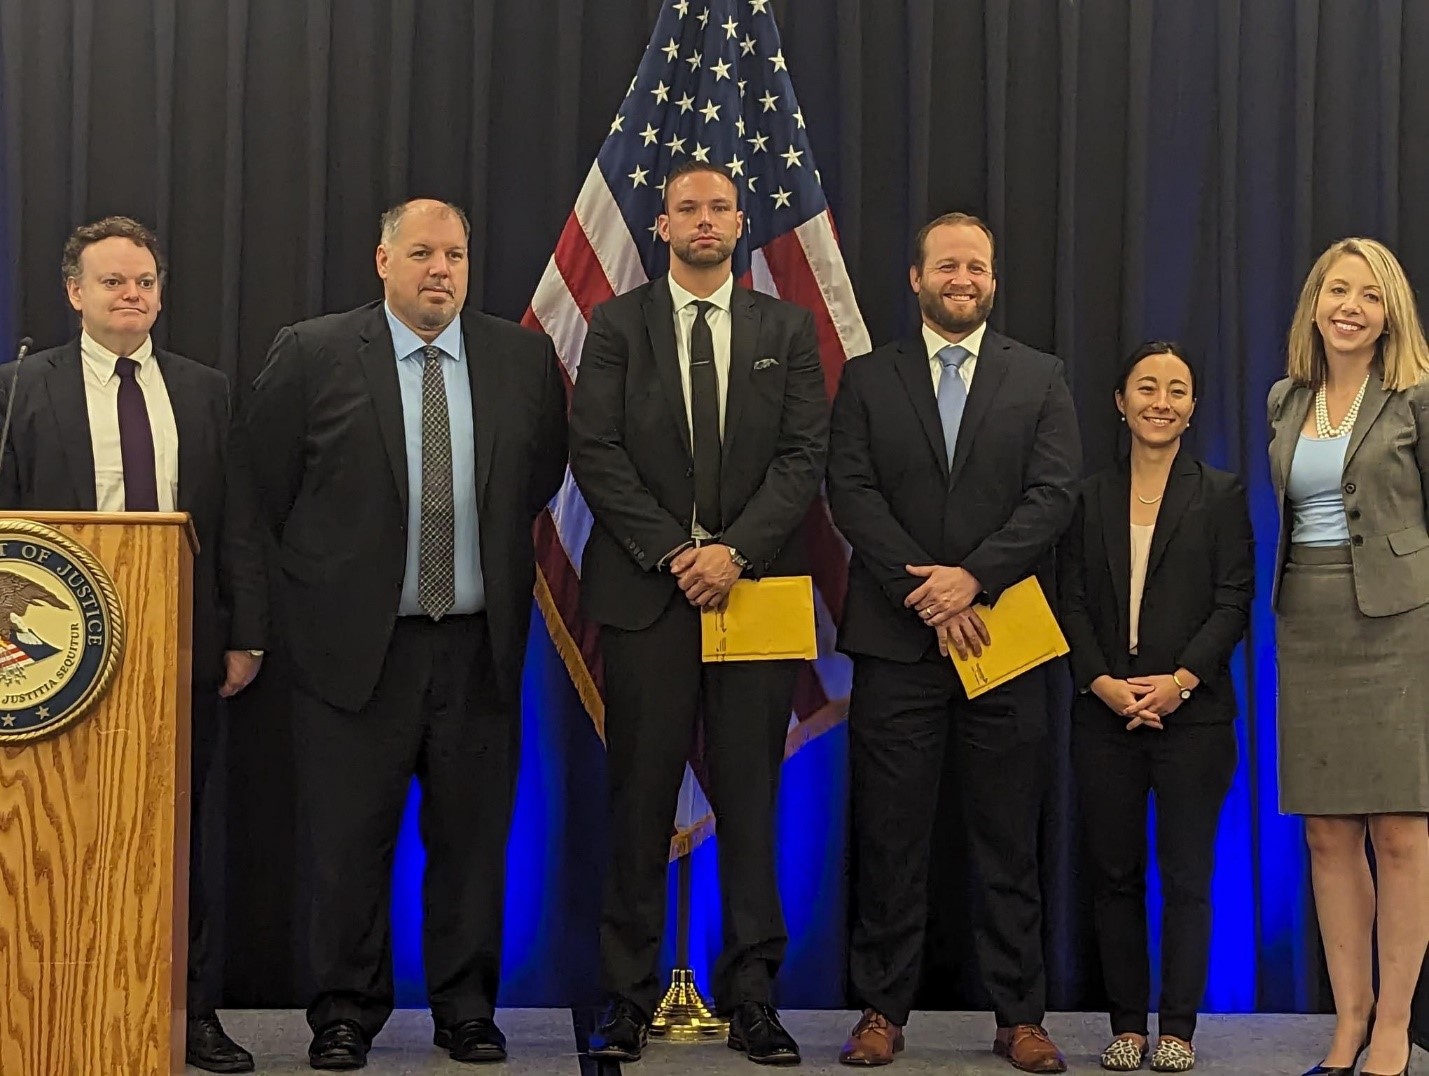 USAO recognizes HSI Washington, D.C. for operation combating MS-13